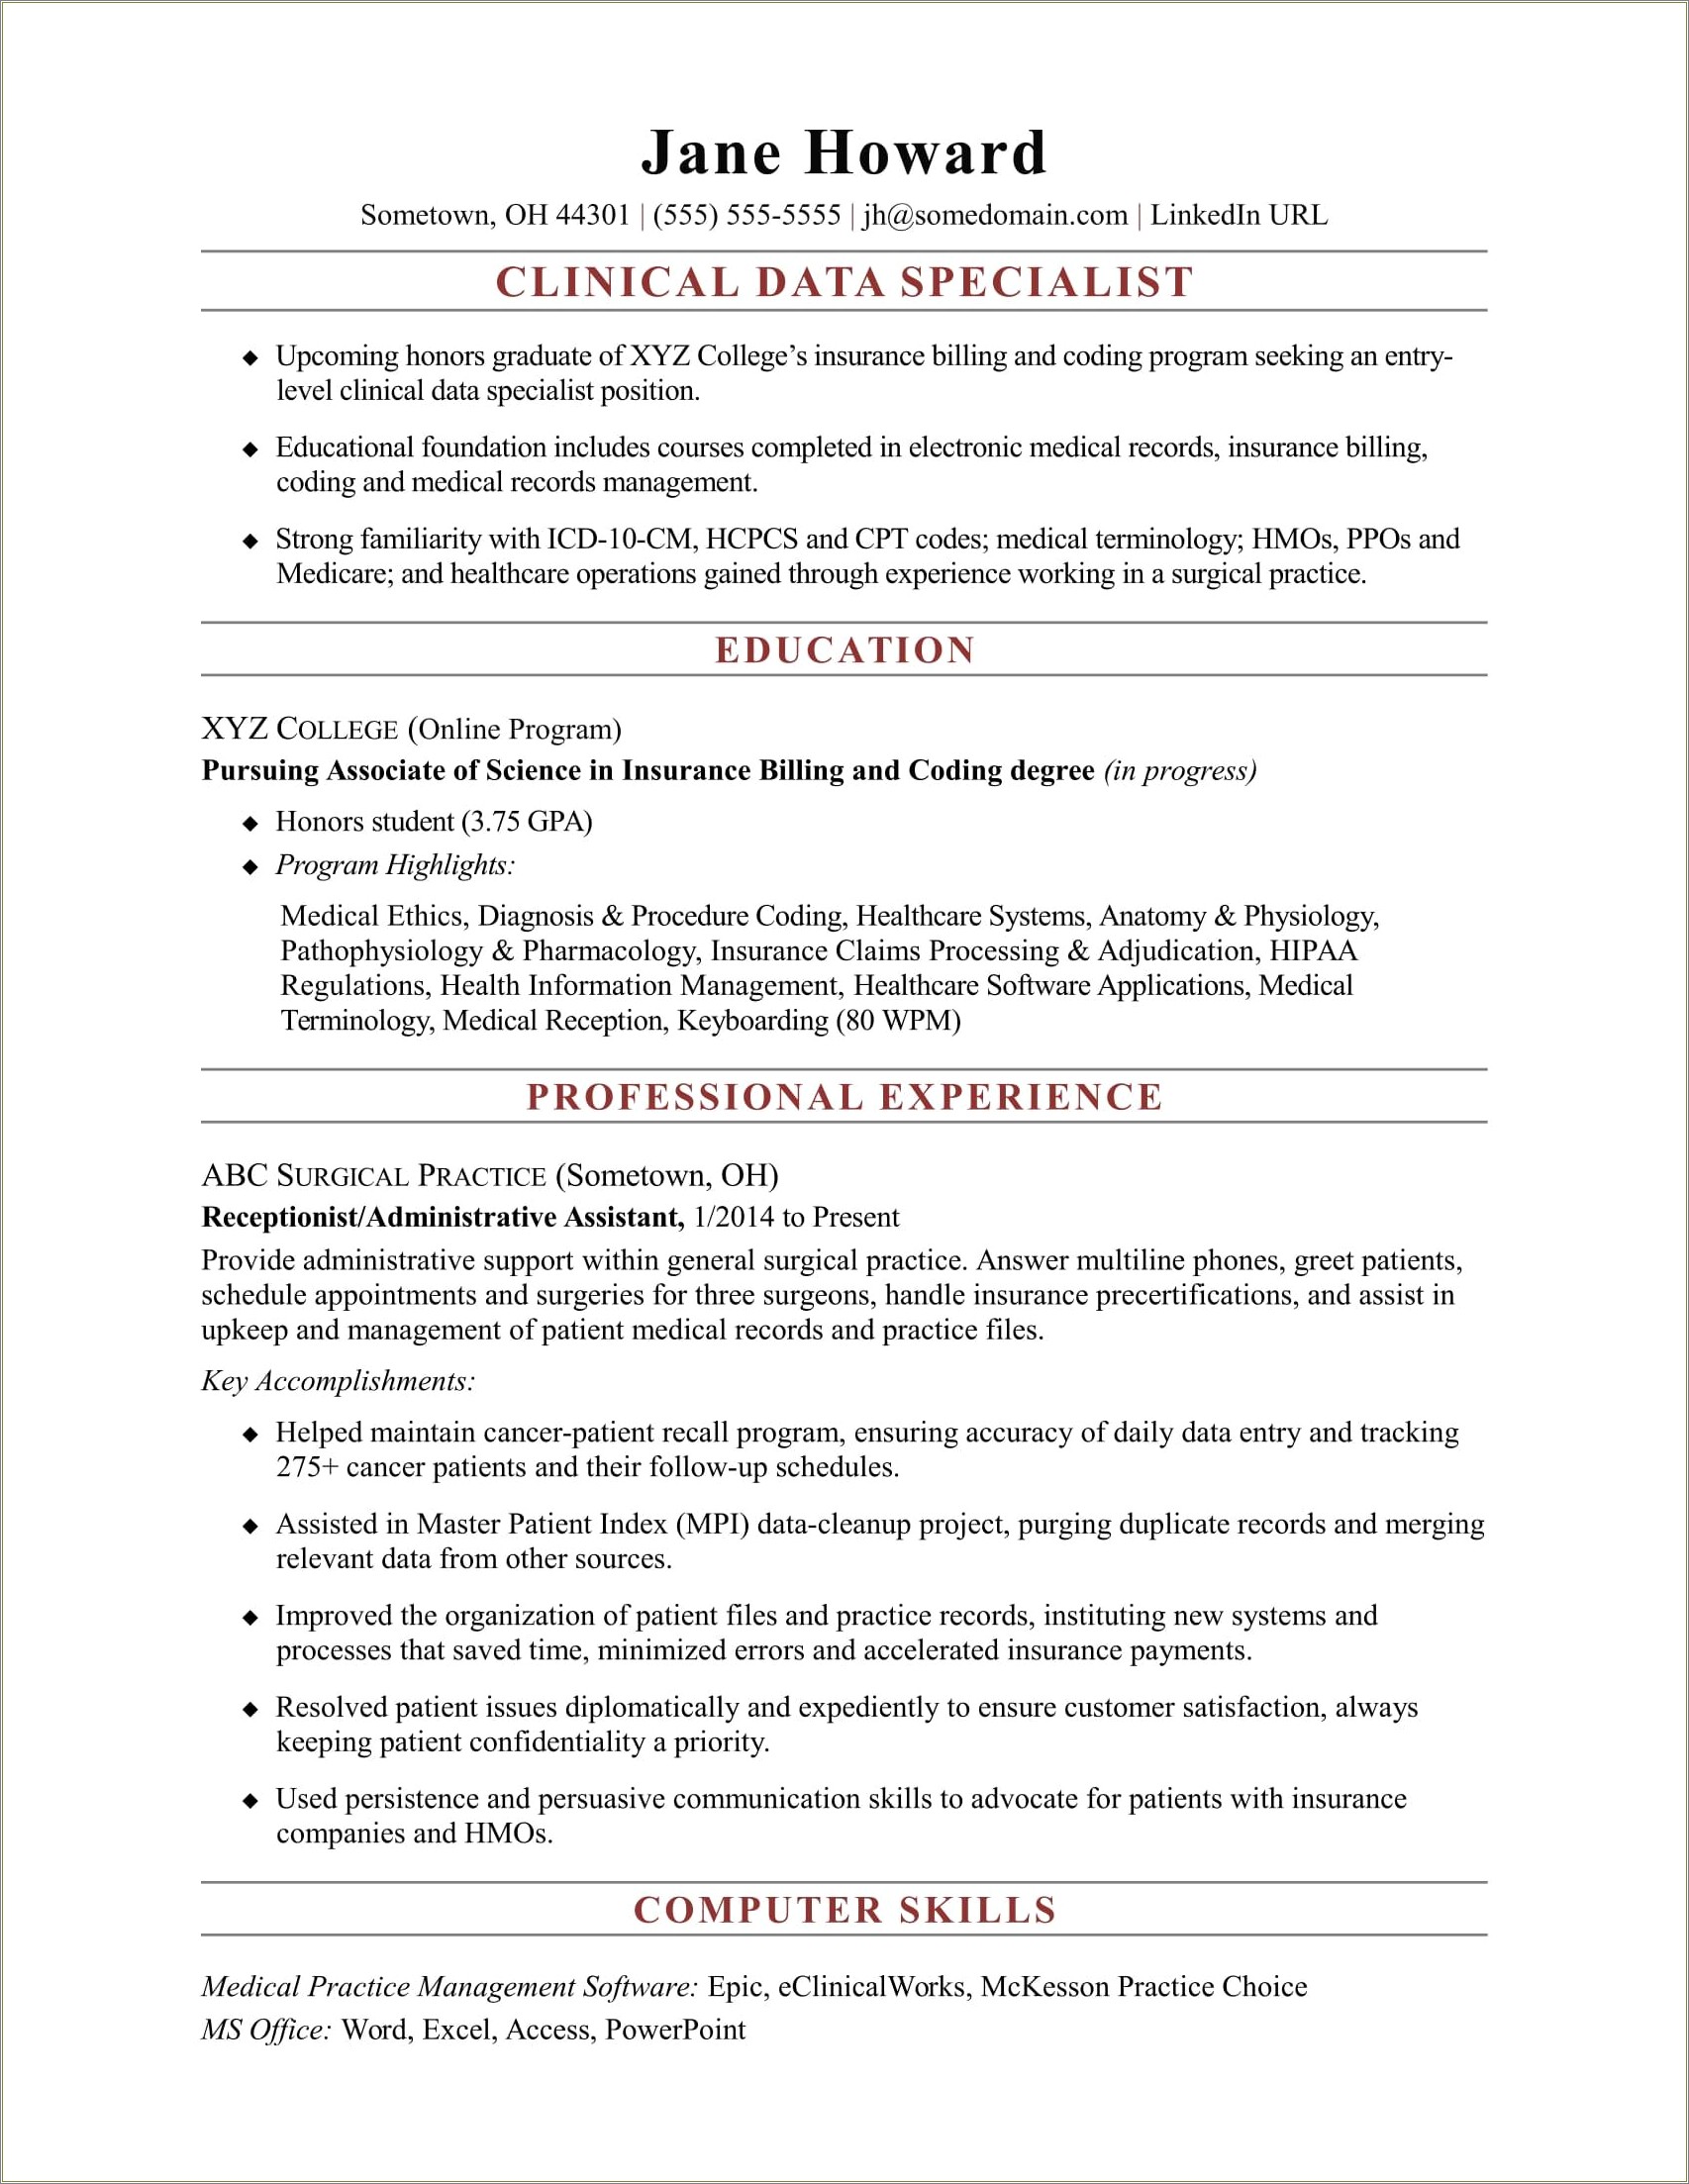 Resume Examples For Working Medical Office